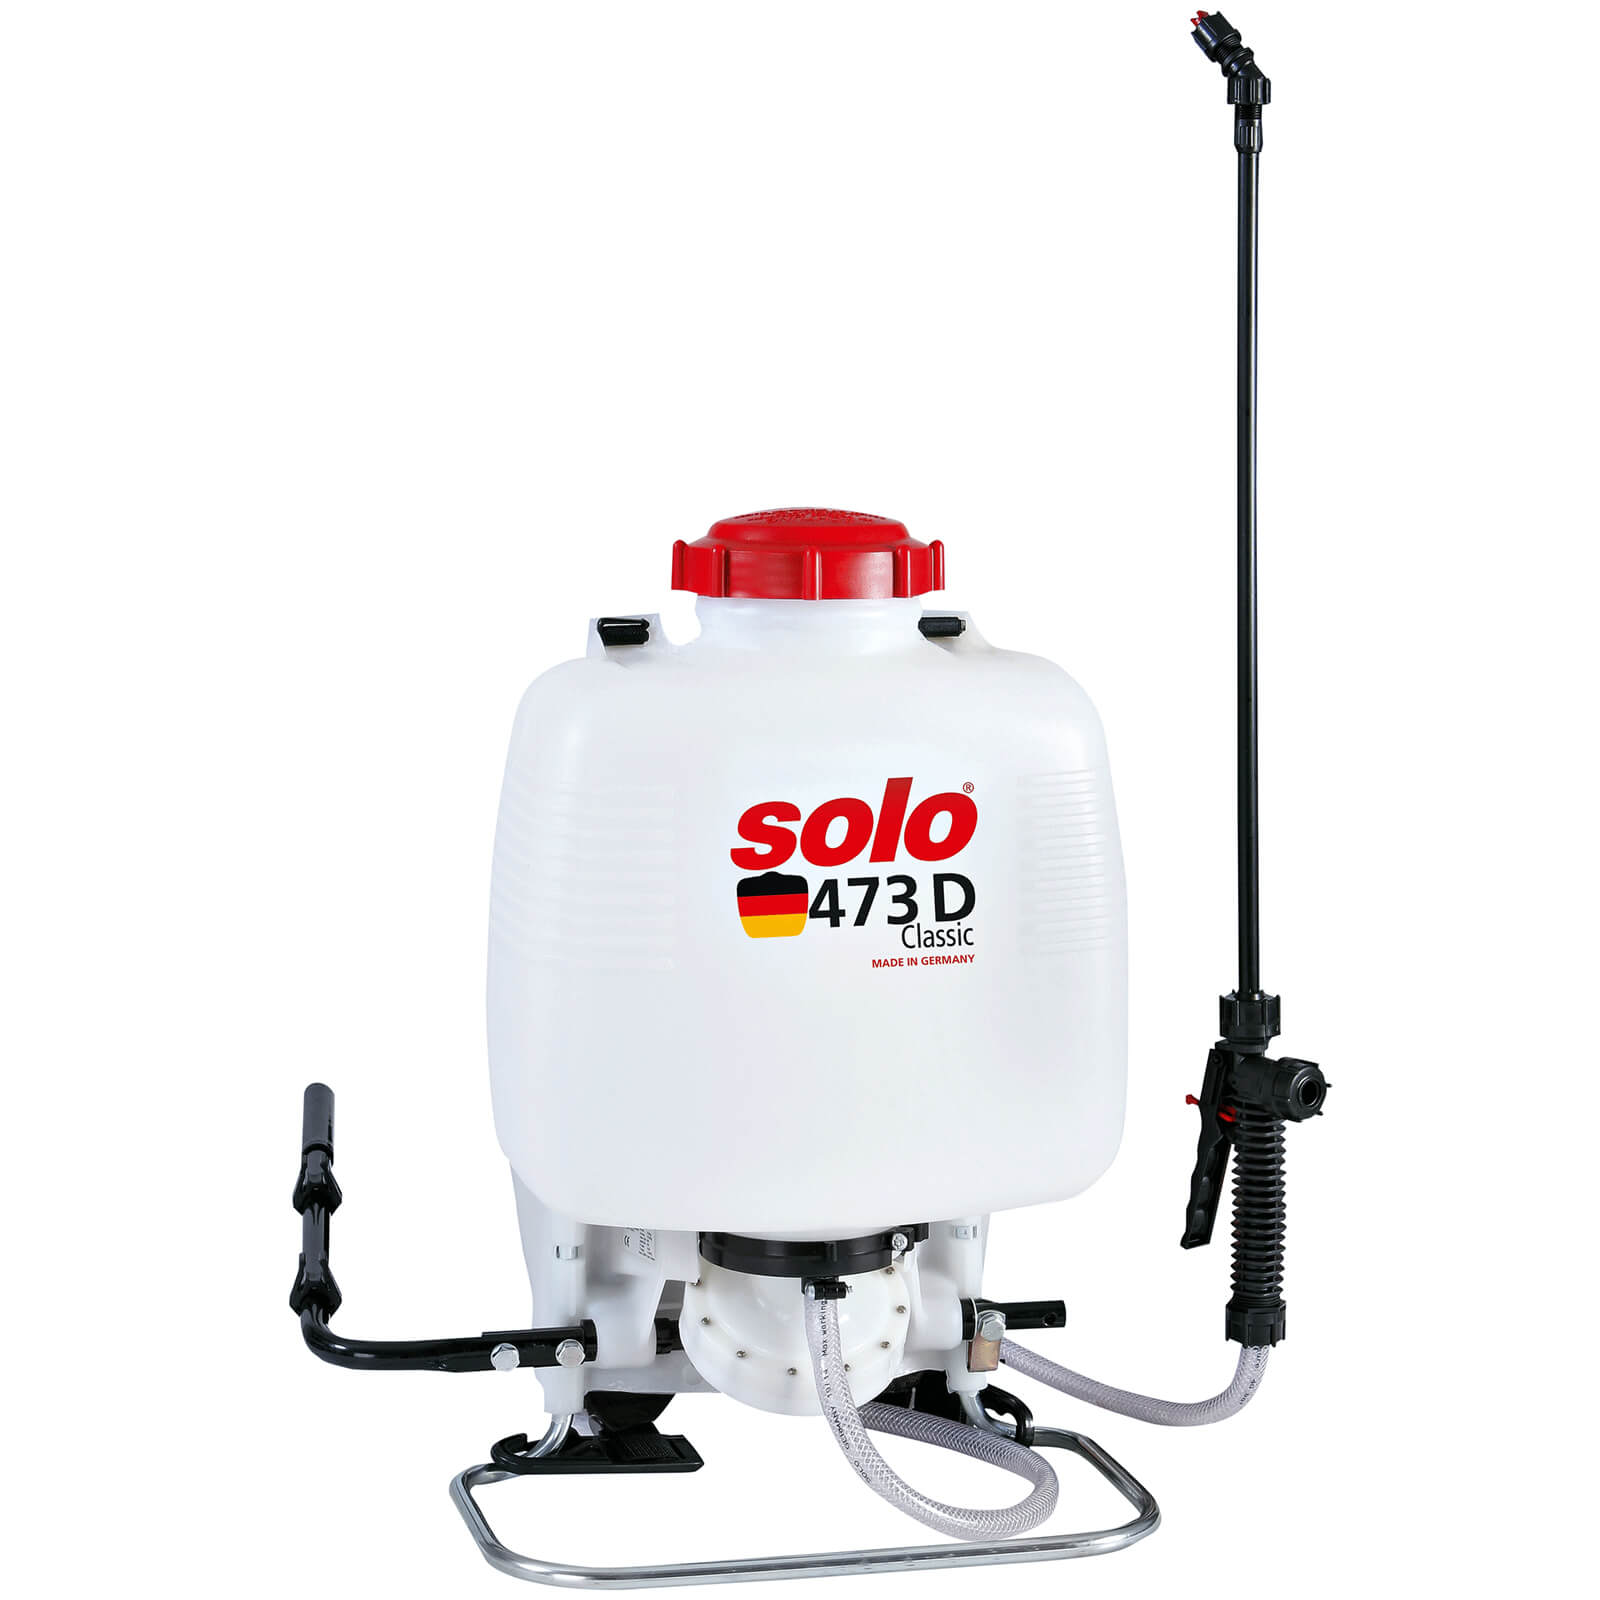 Solo 473D CLASSIC Chemical and Water Pressure Sprayer 10l